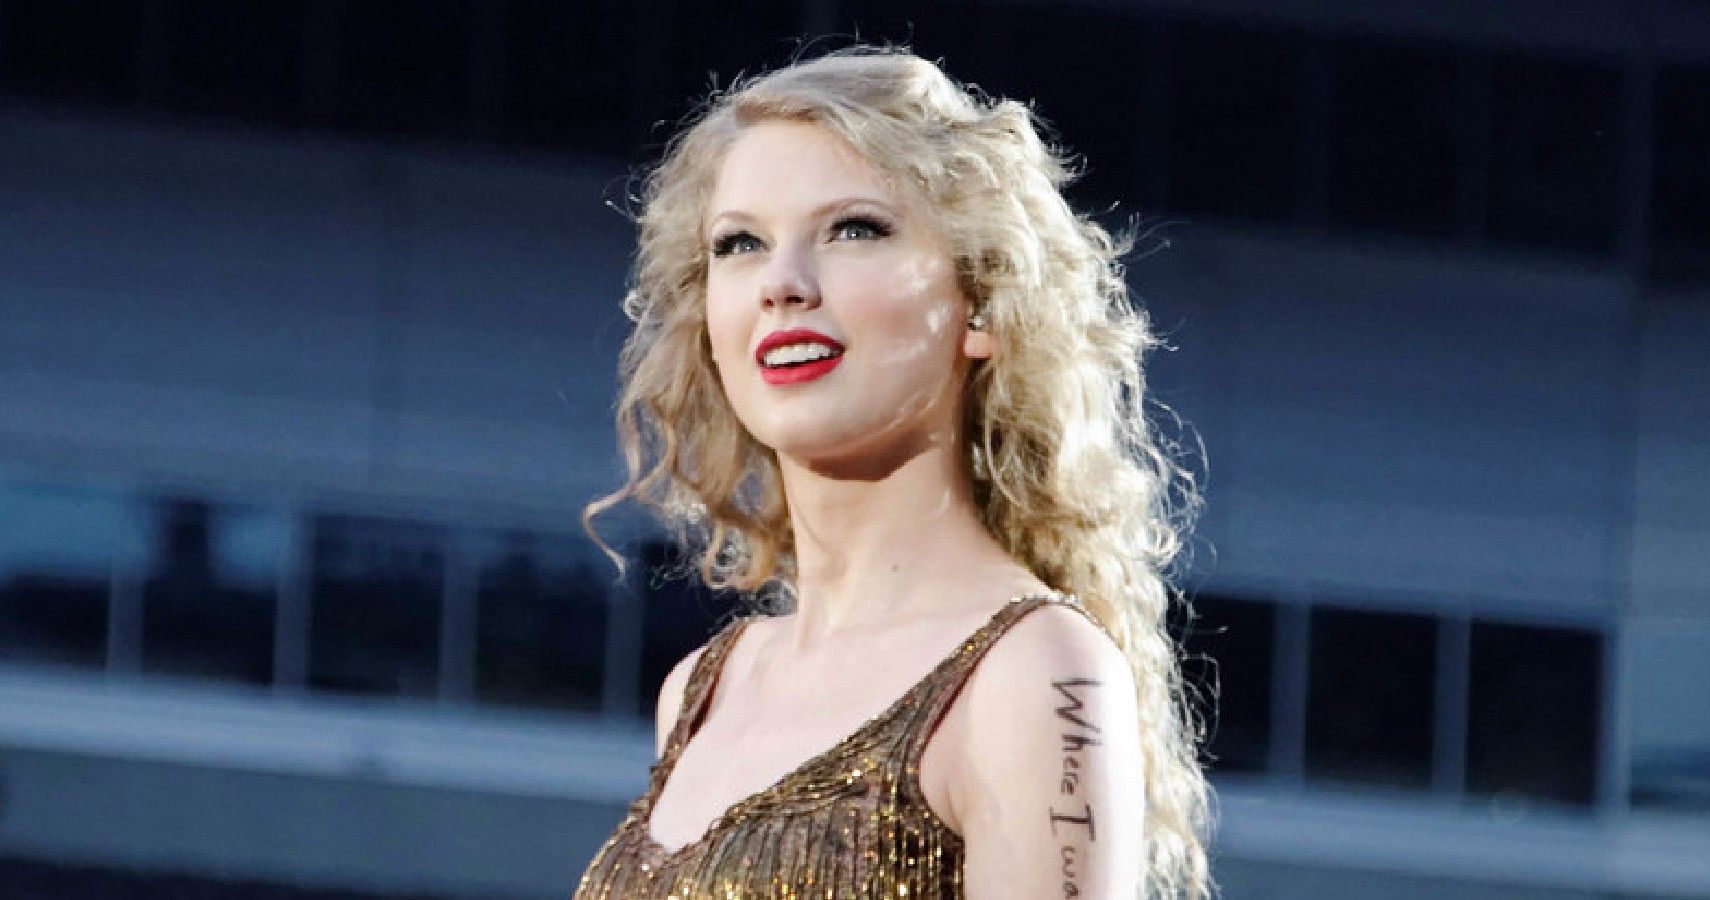 Taylor Swift Opens Up About Miscarriage In New Song 